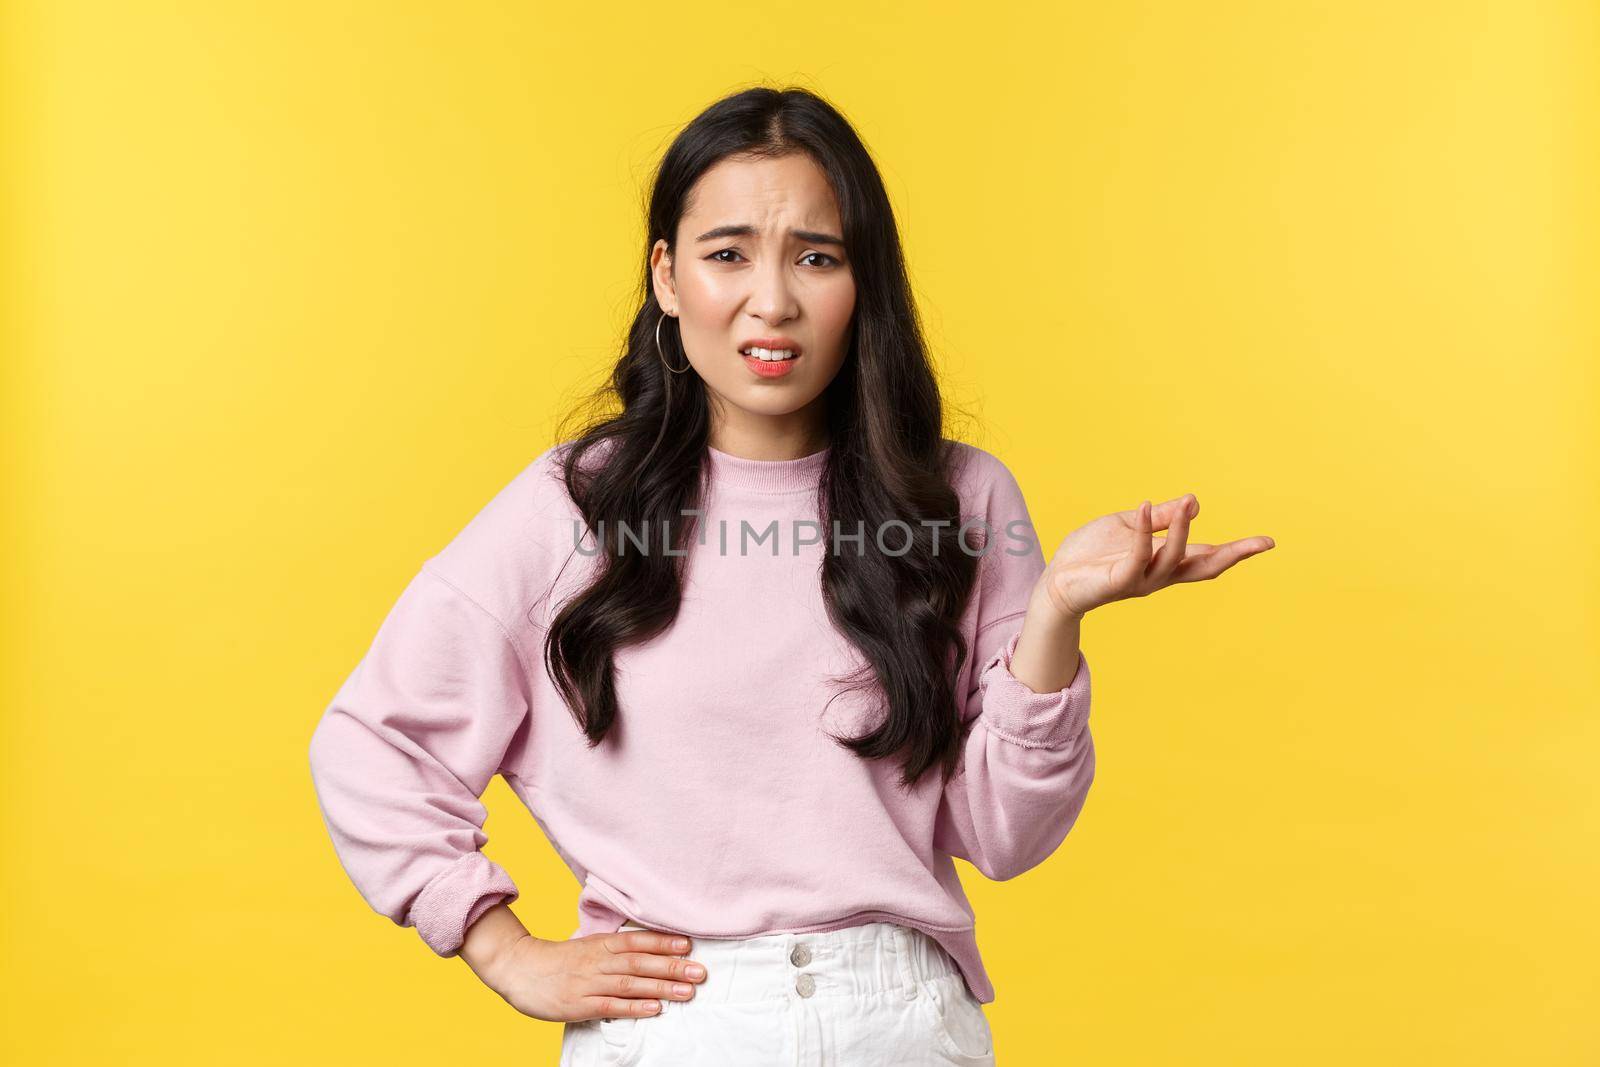 People emotions, lifestyle and fashion concept. Confused and unimpressed korean girl in stylish outfit, arguing, having conversation, shrugging with hand raised in dismay, look skeptical.